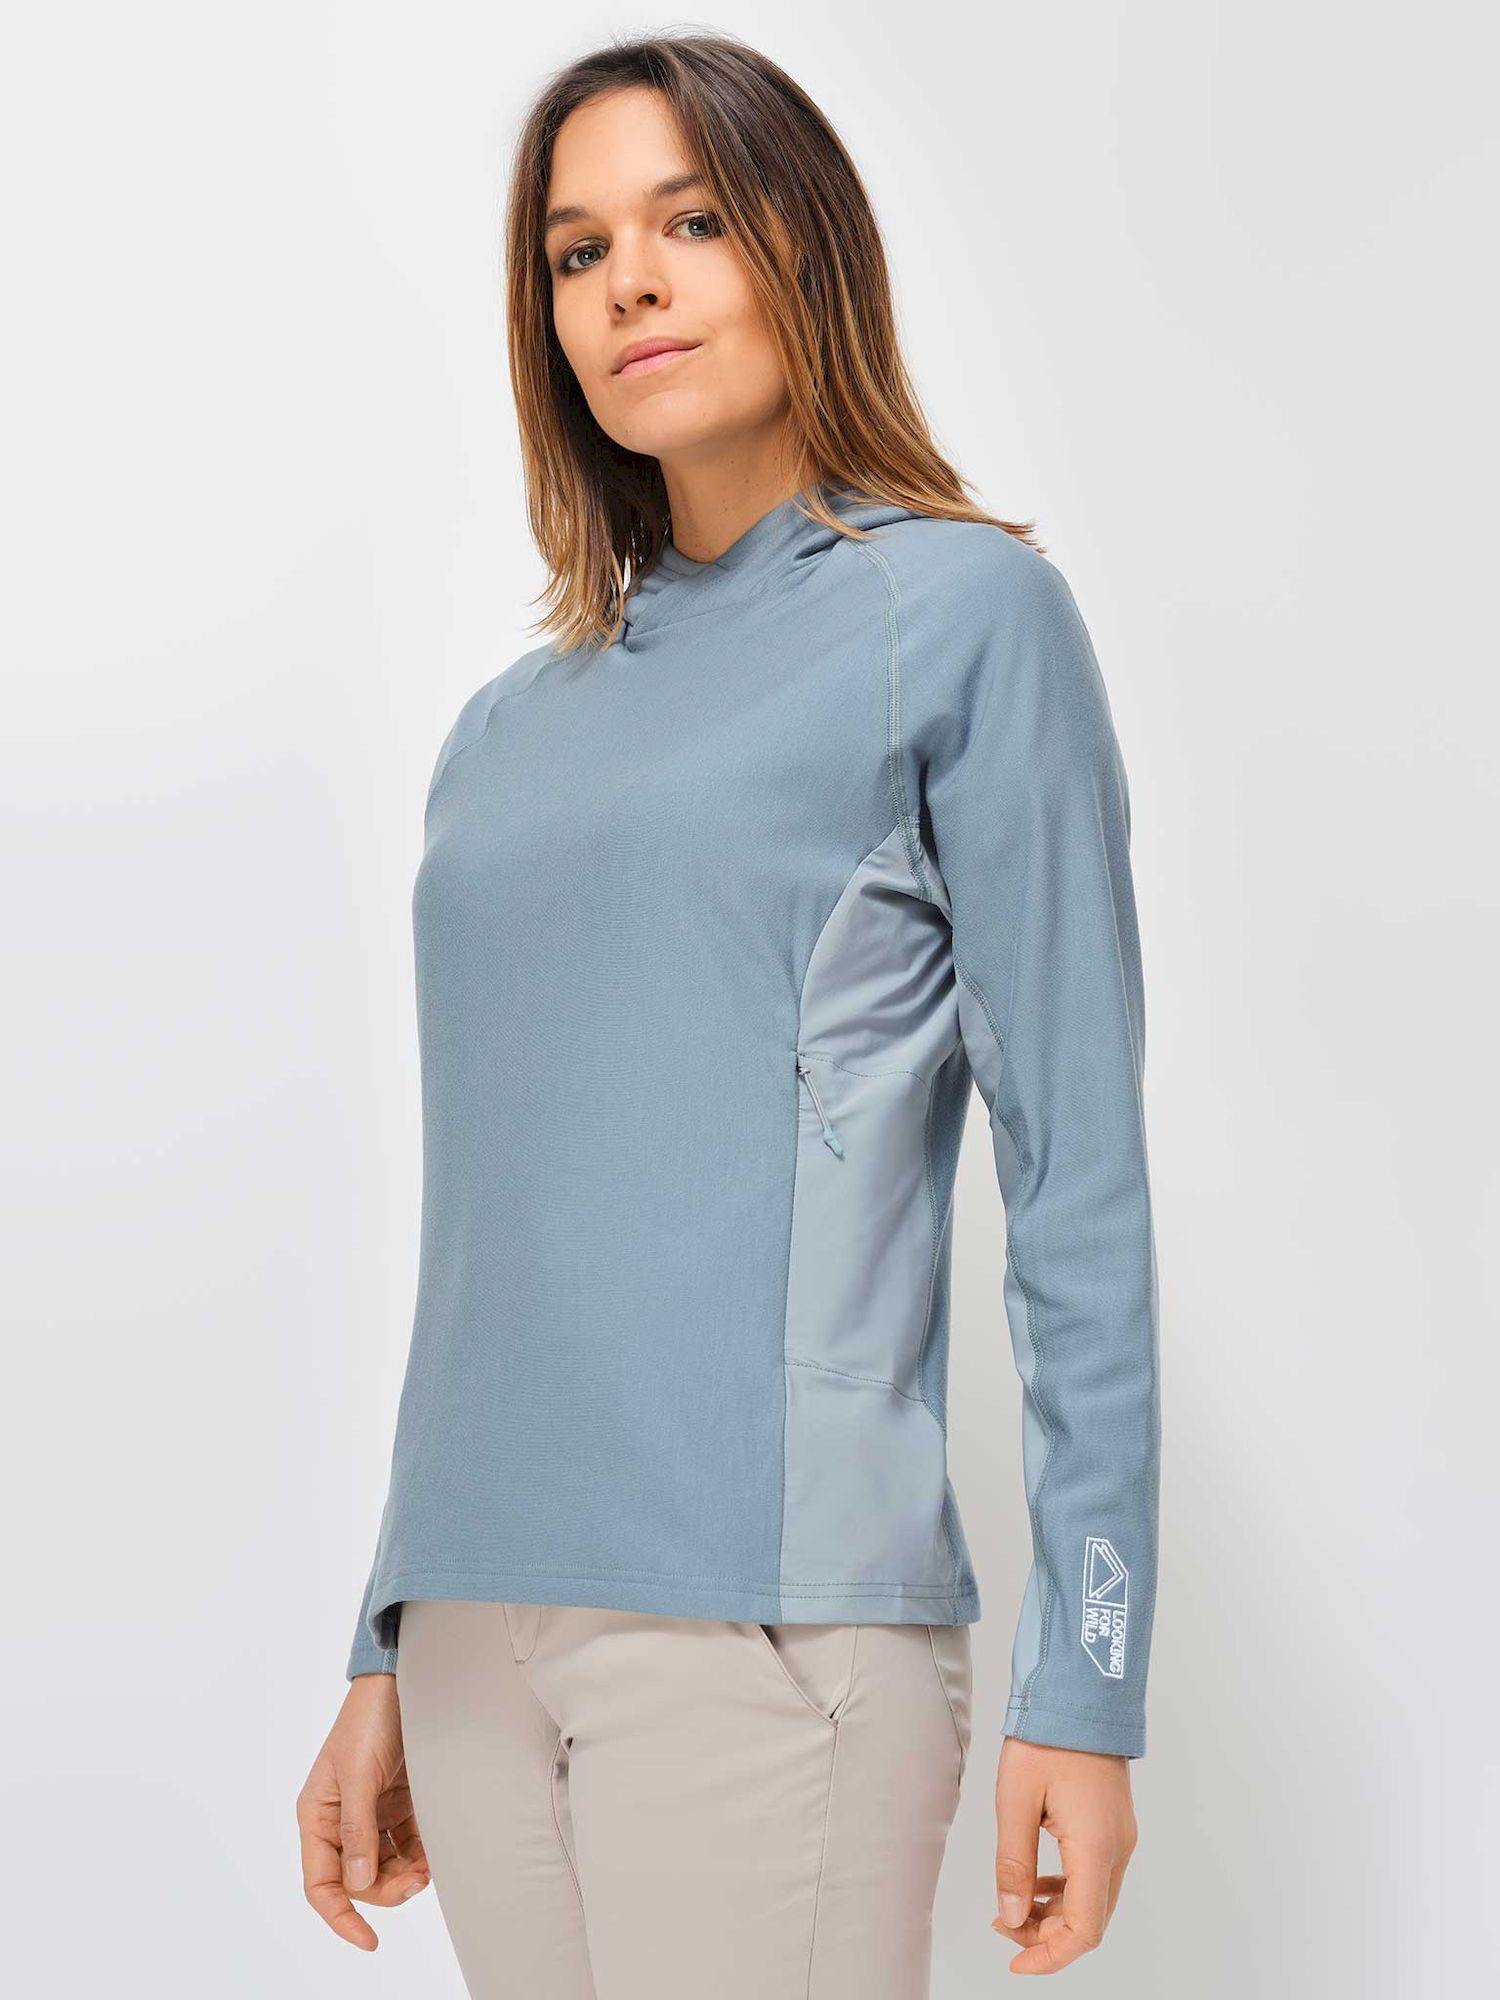 Looking For Wild Central Park - Hoodie - Women's